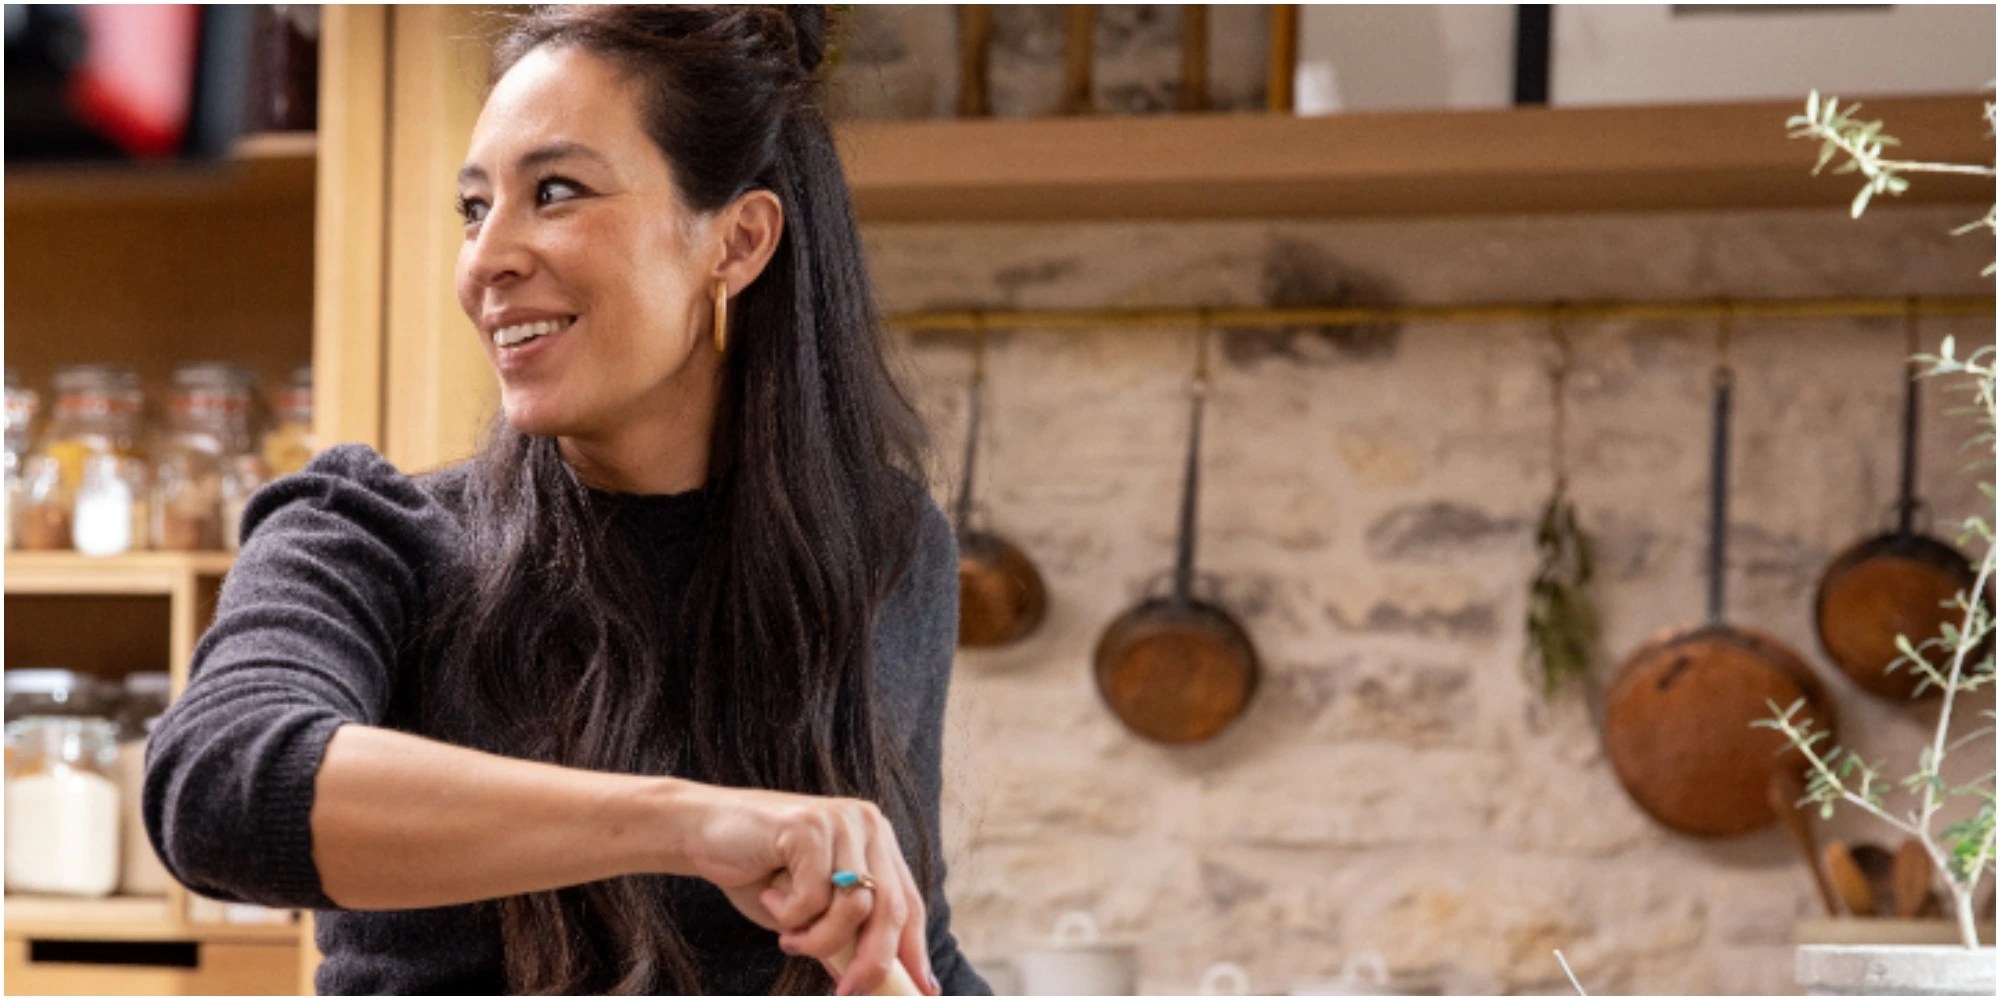 Joanna Gaines cooks in the kitchen of her discovery+ show.